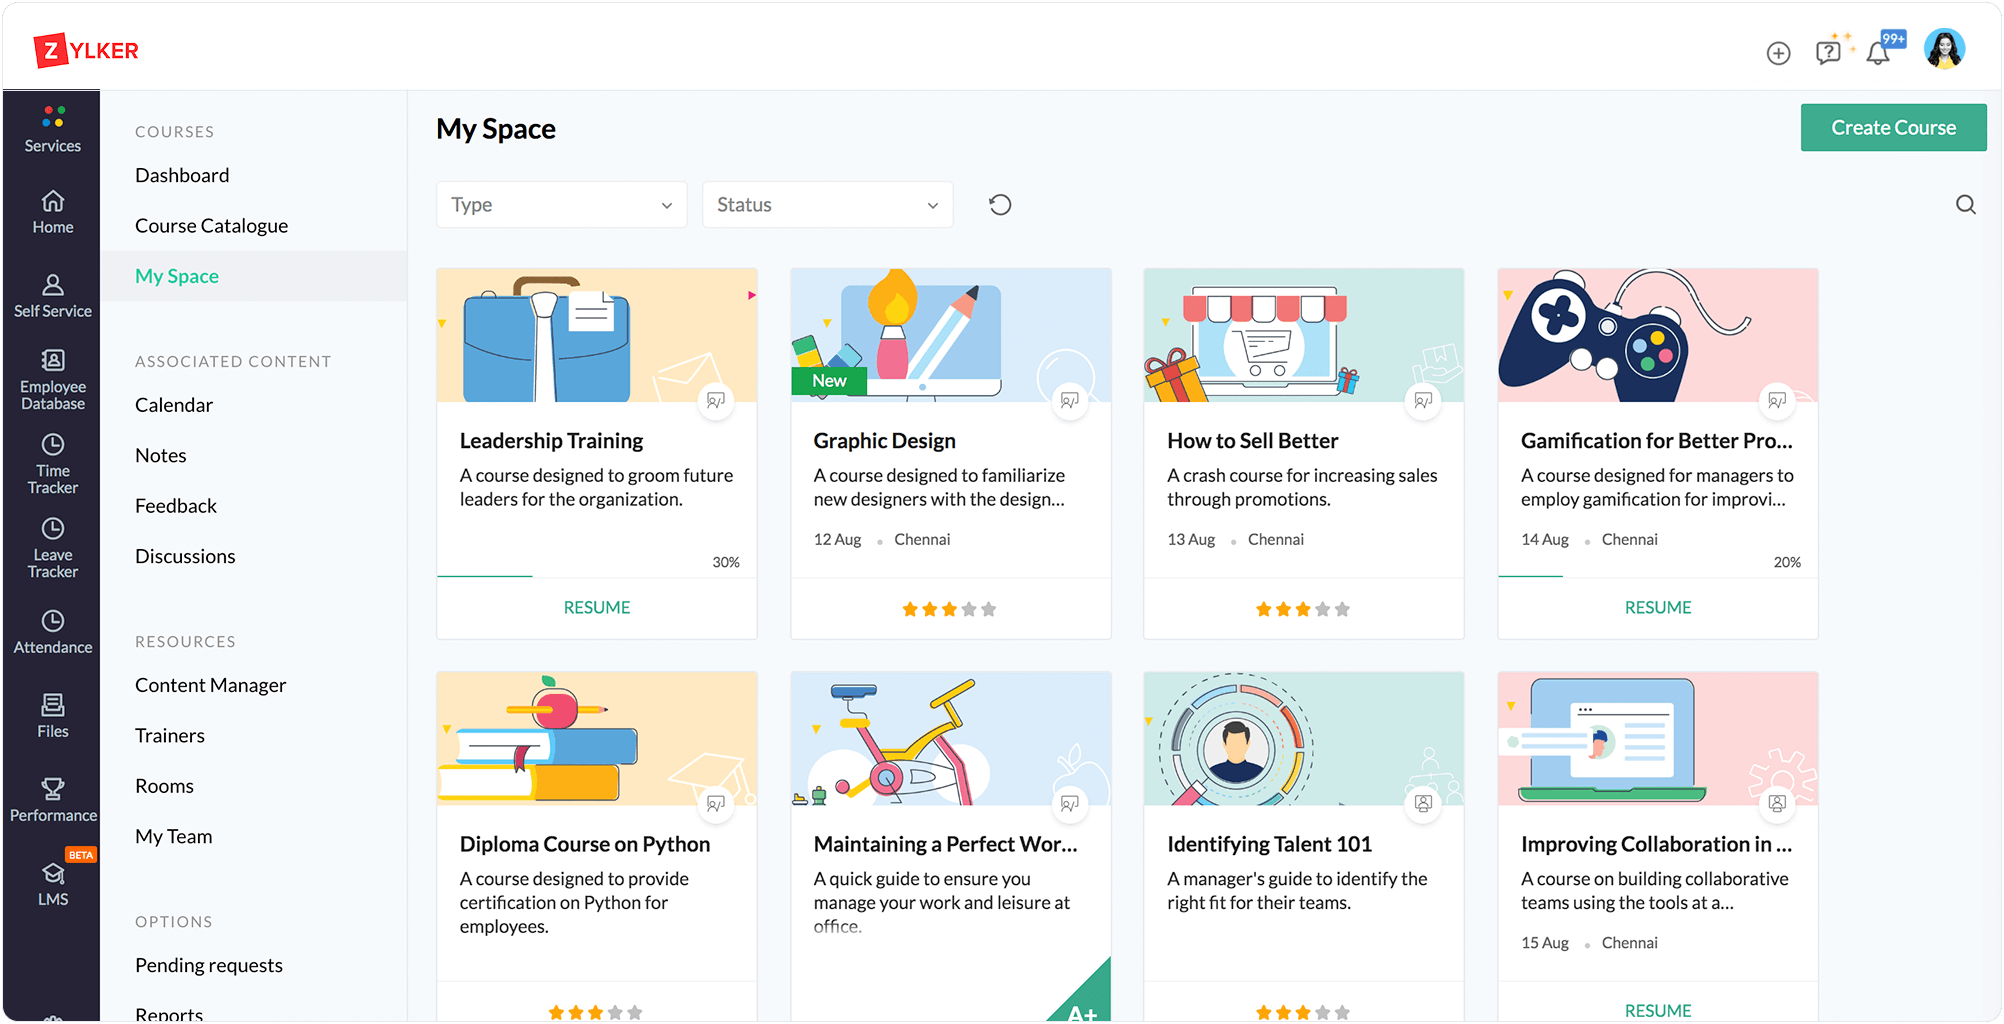 Key features of Zoho People's HCM software